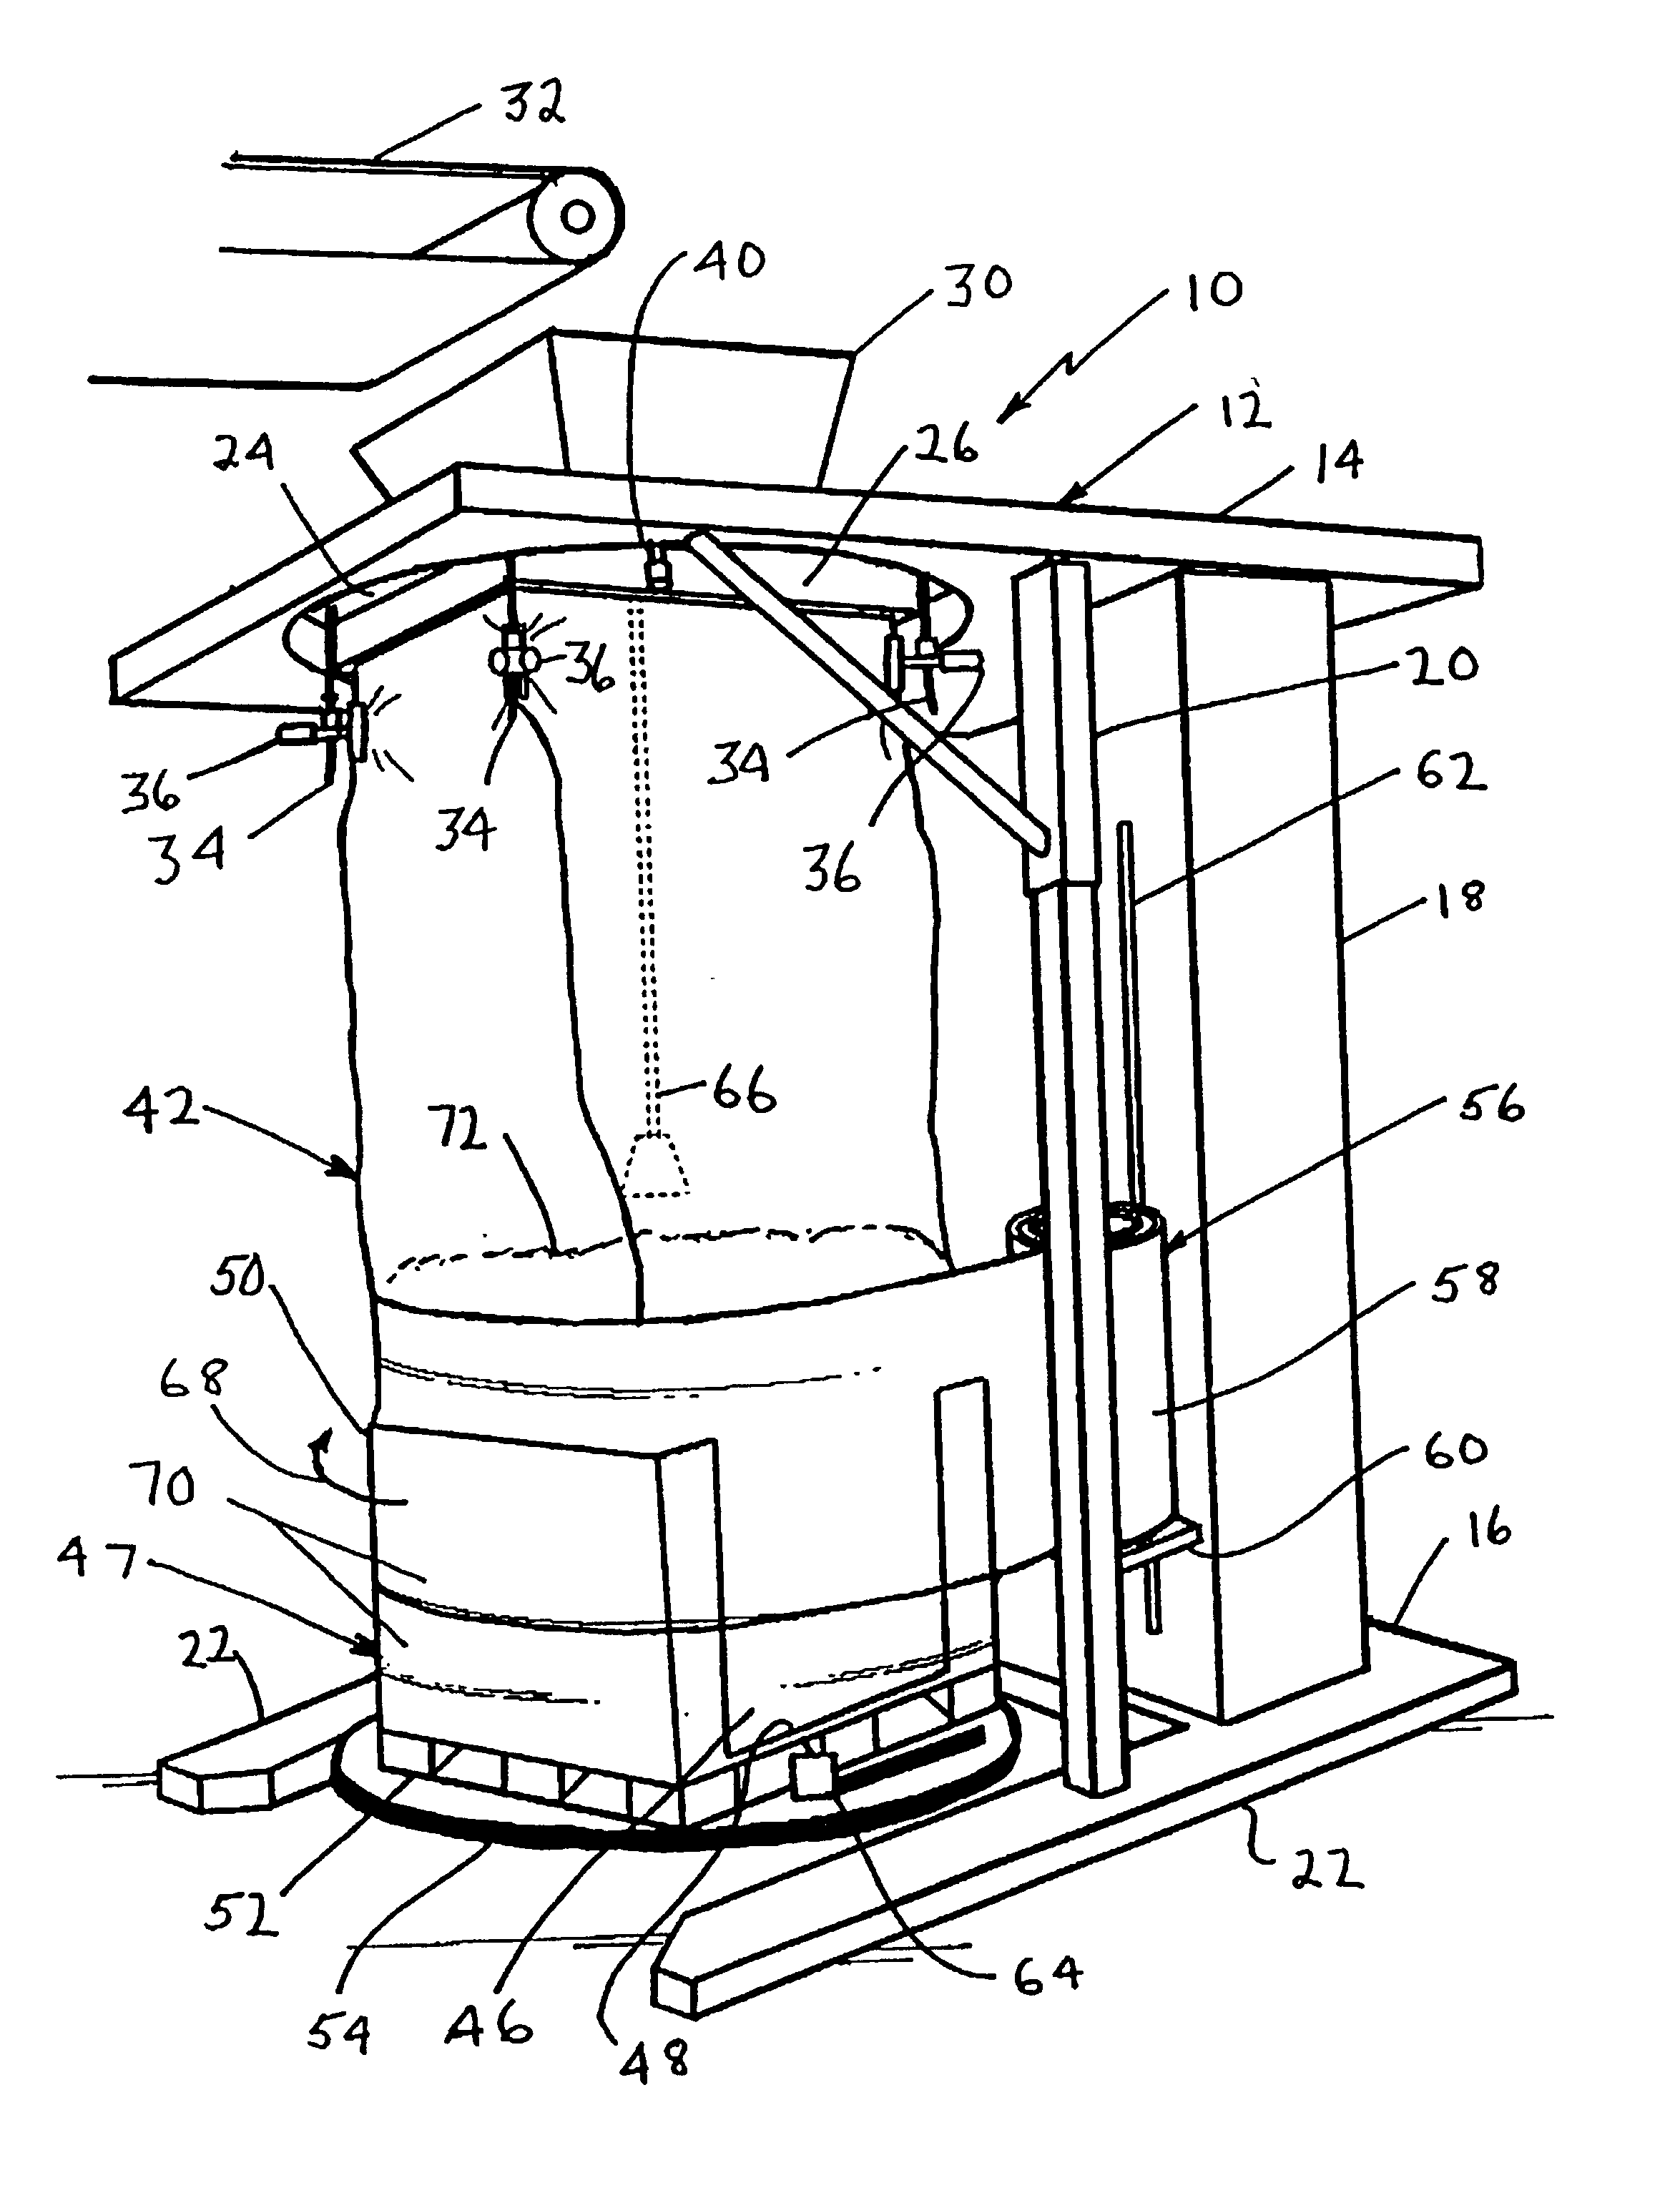 Transportable container for bulk goods and method for forming the container